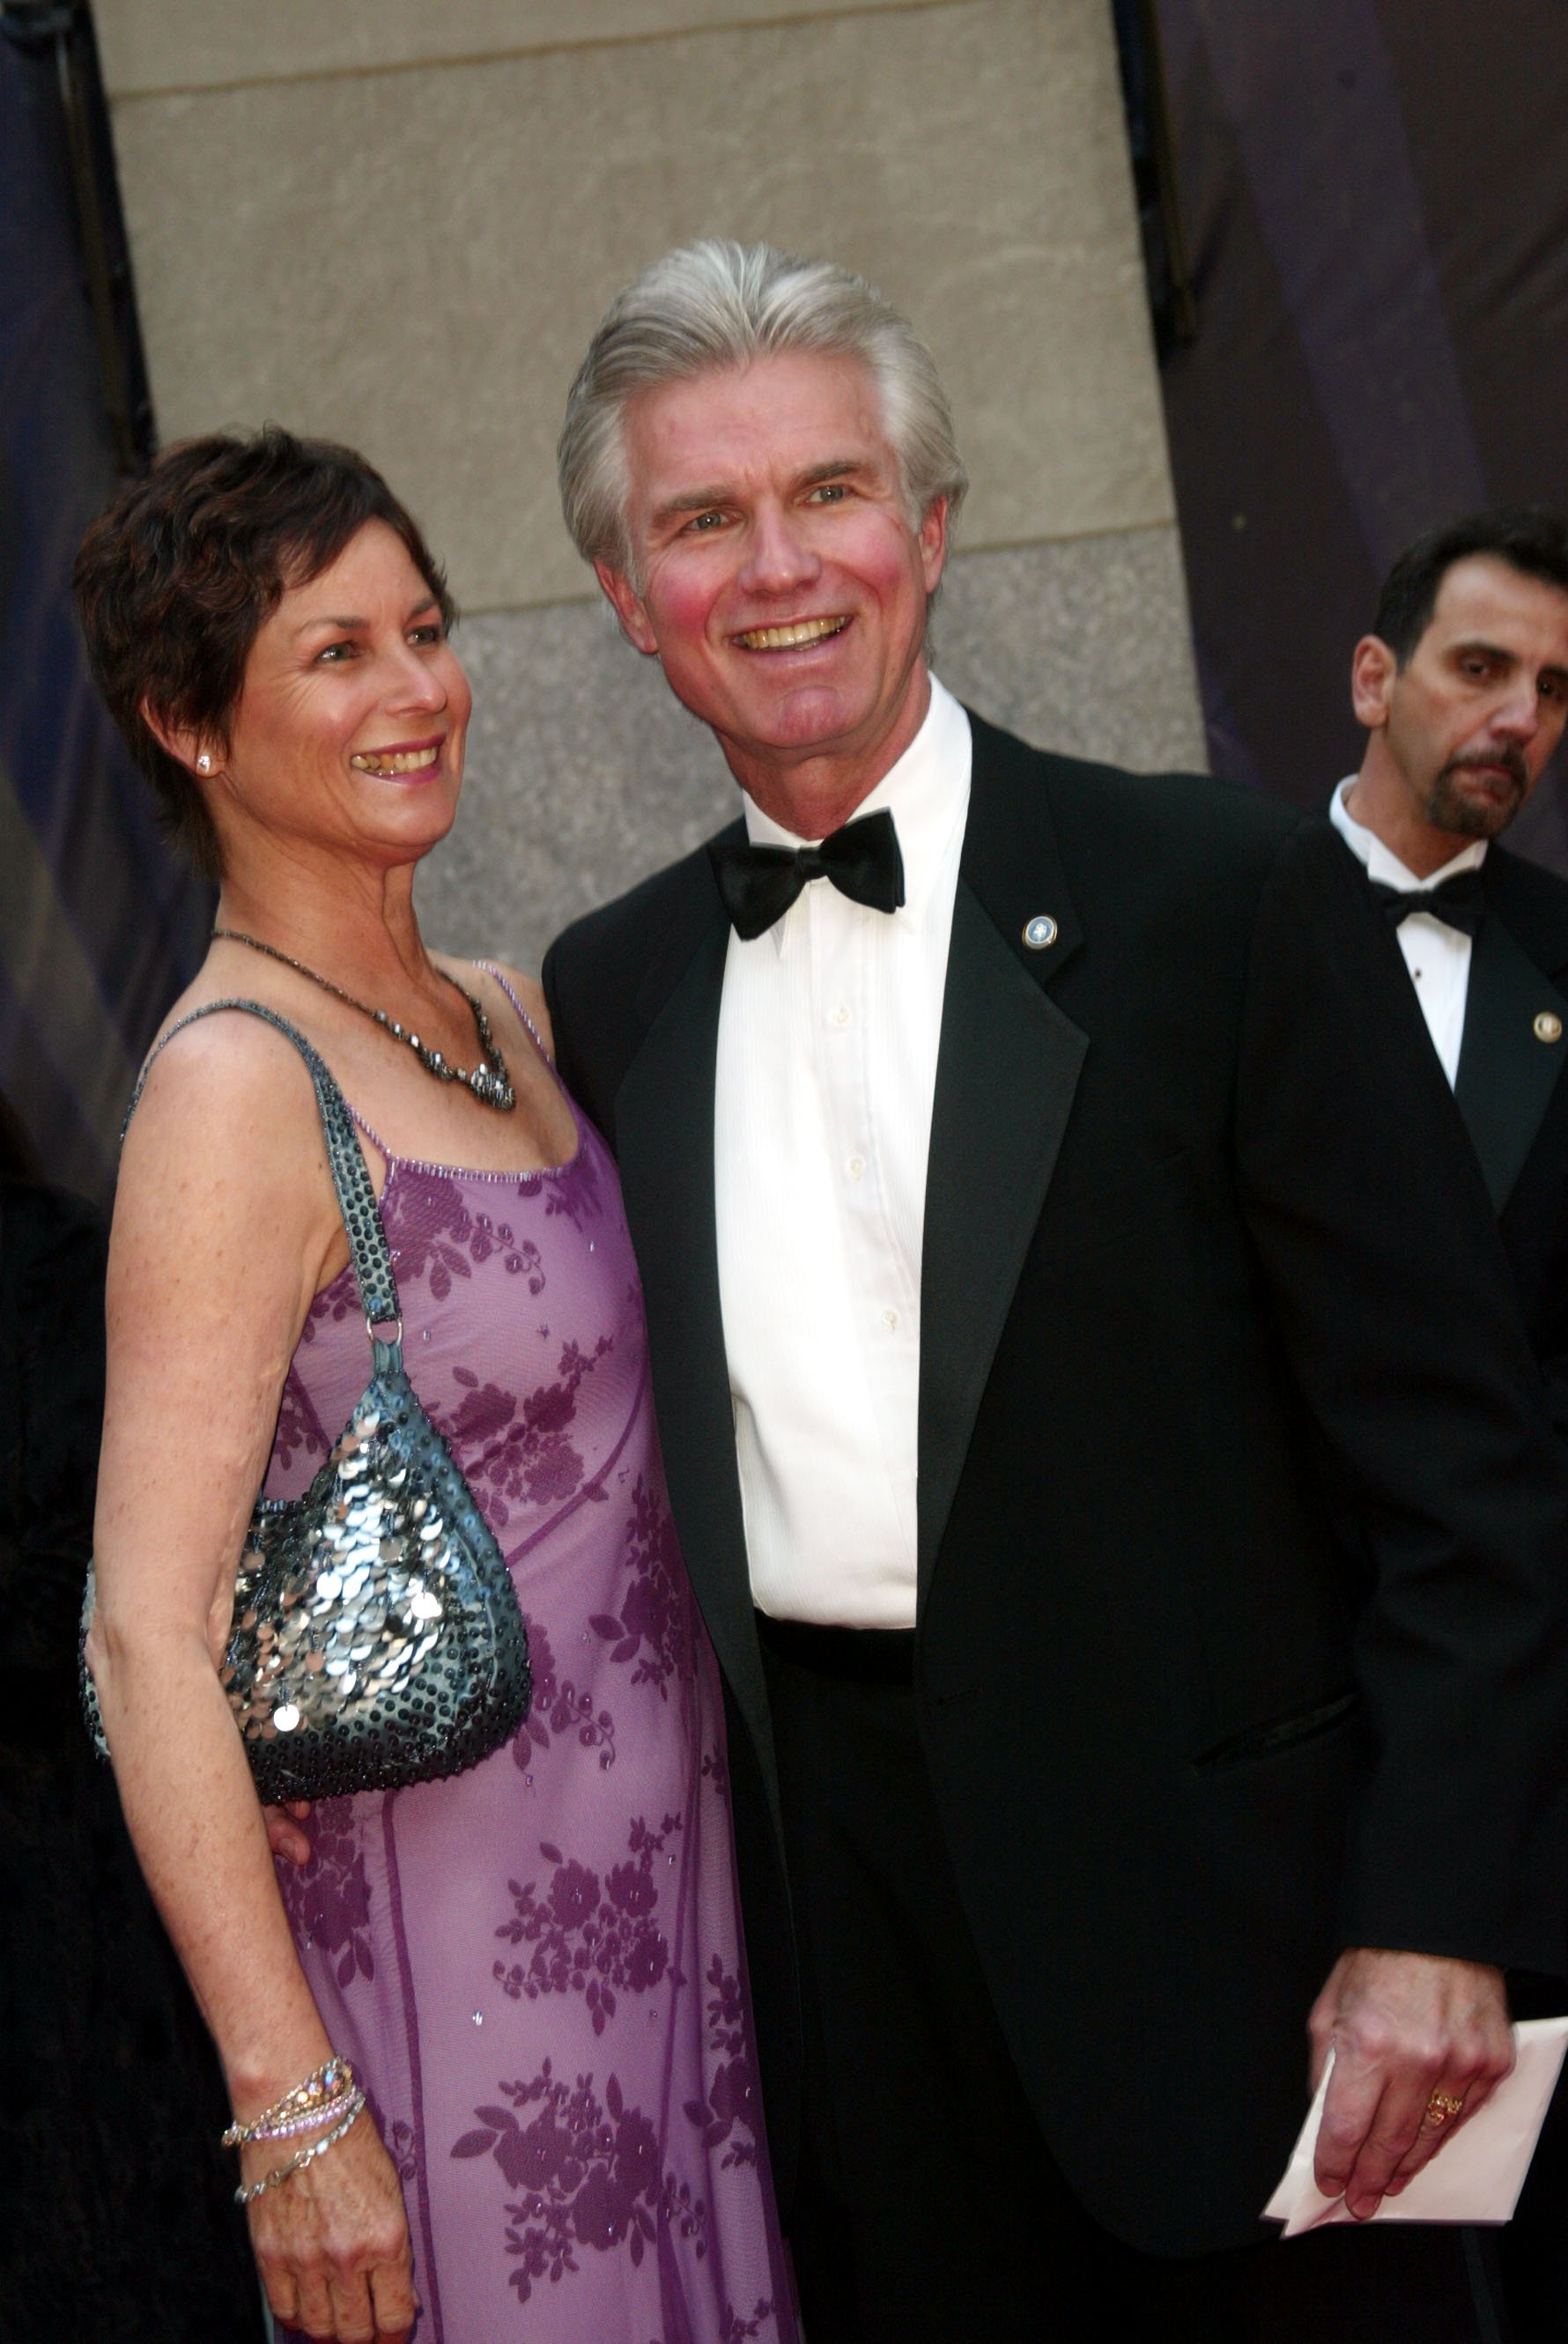 Kent Mccord withKent McCord and Cynthia Doty at the 75th Anniversary Celebration at Rockefeller Plaza in May 5, 2002 in New York City. | Source: Getty Images